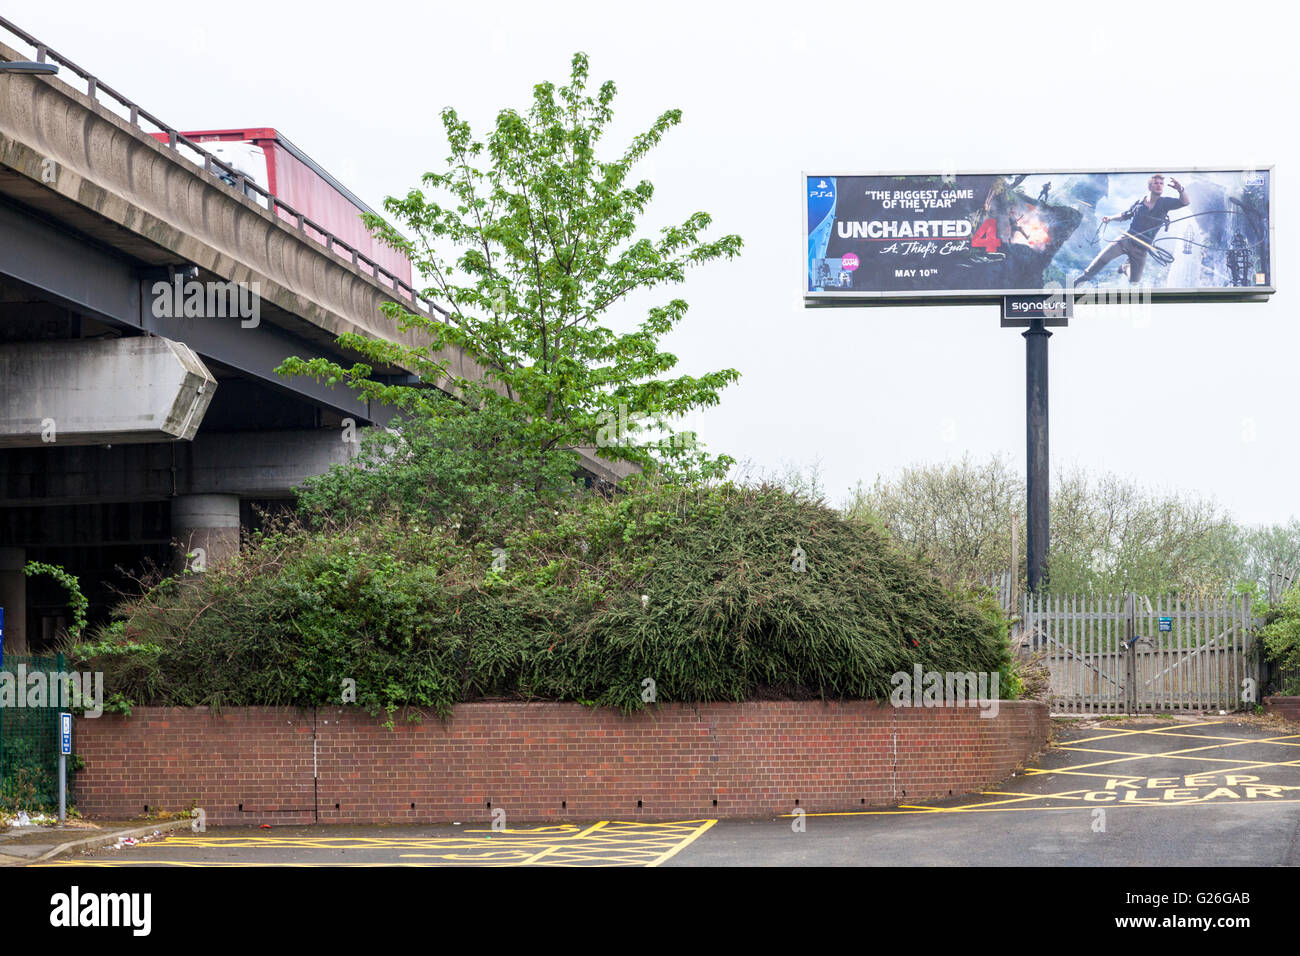 High level electronic advertising billboard next to the M6 motorway, Bescot, Walsall, West Midlands, England, UK Stock Photo